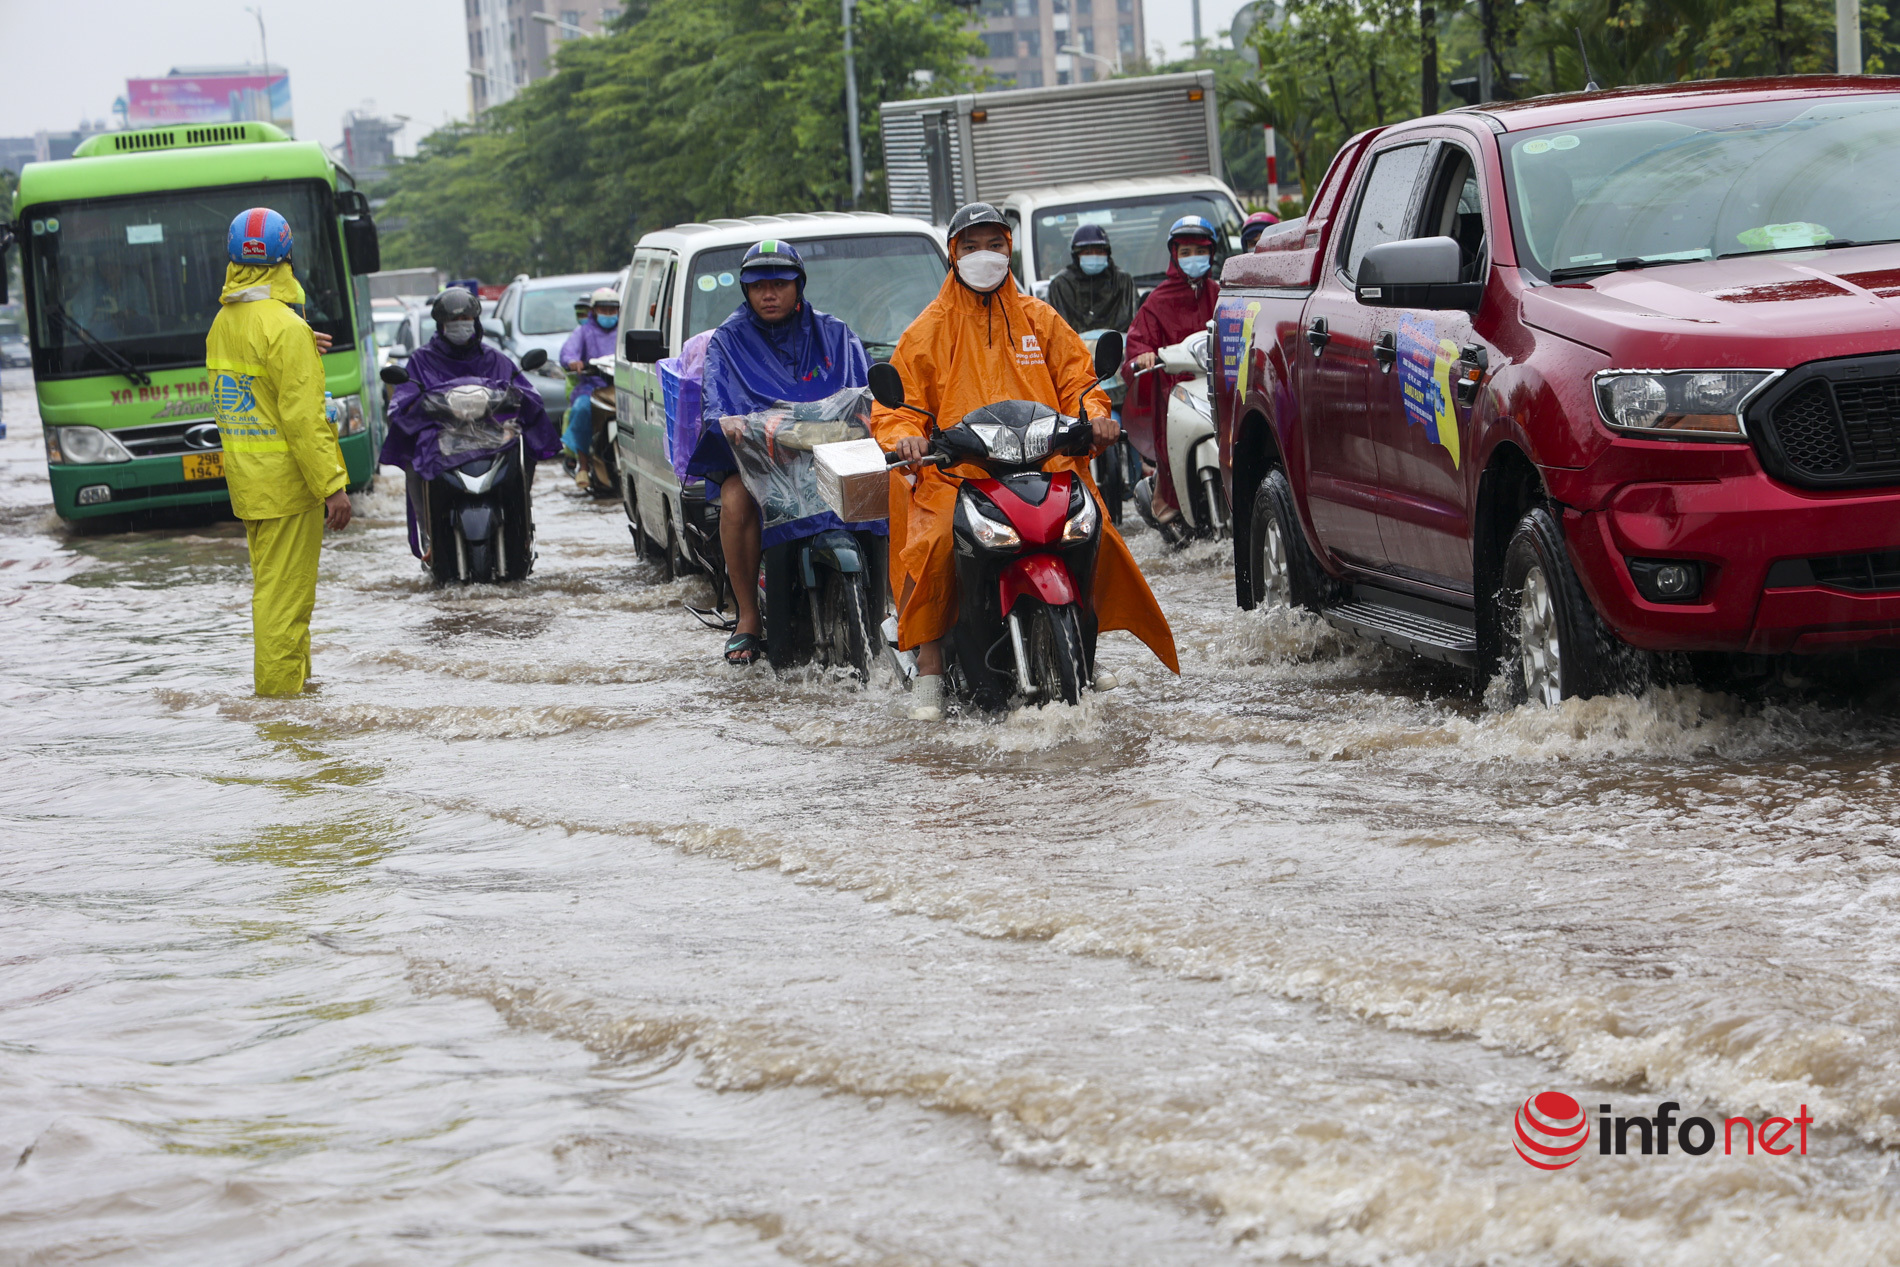 After the rain stops, the streets of Hanoi are still heavily flooded